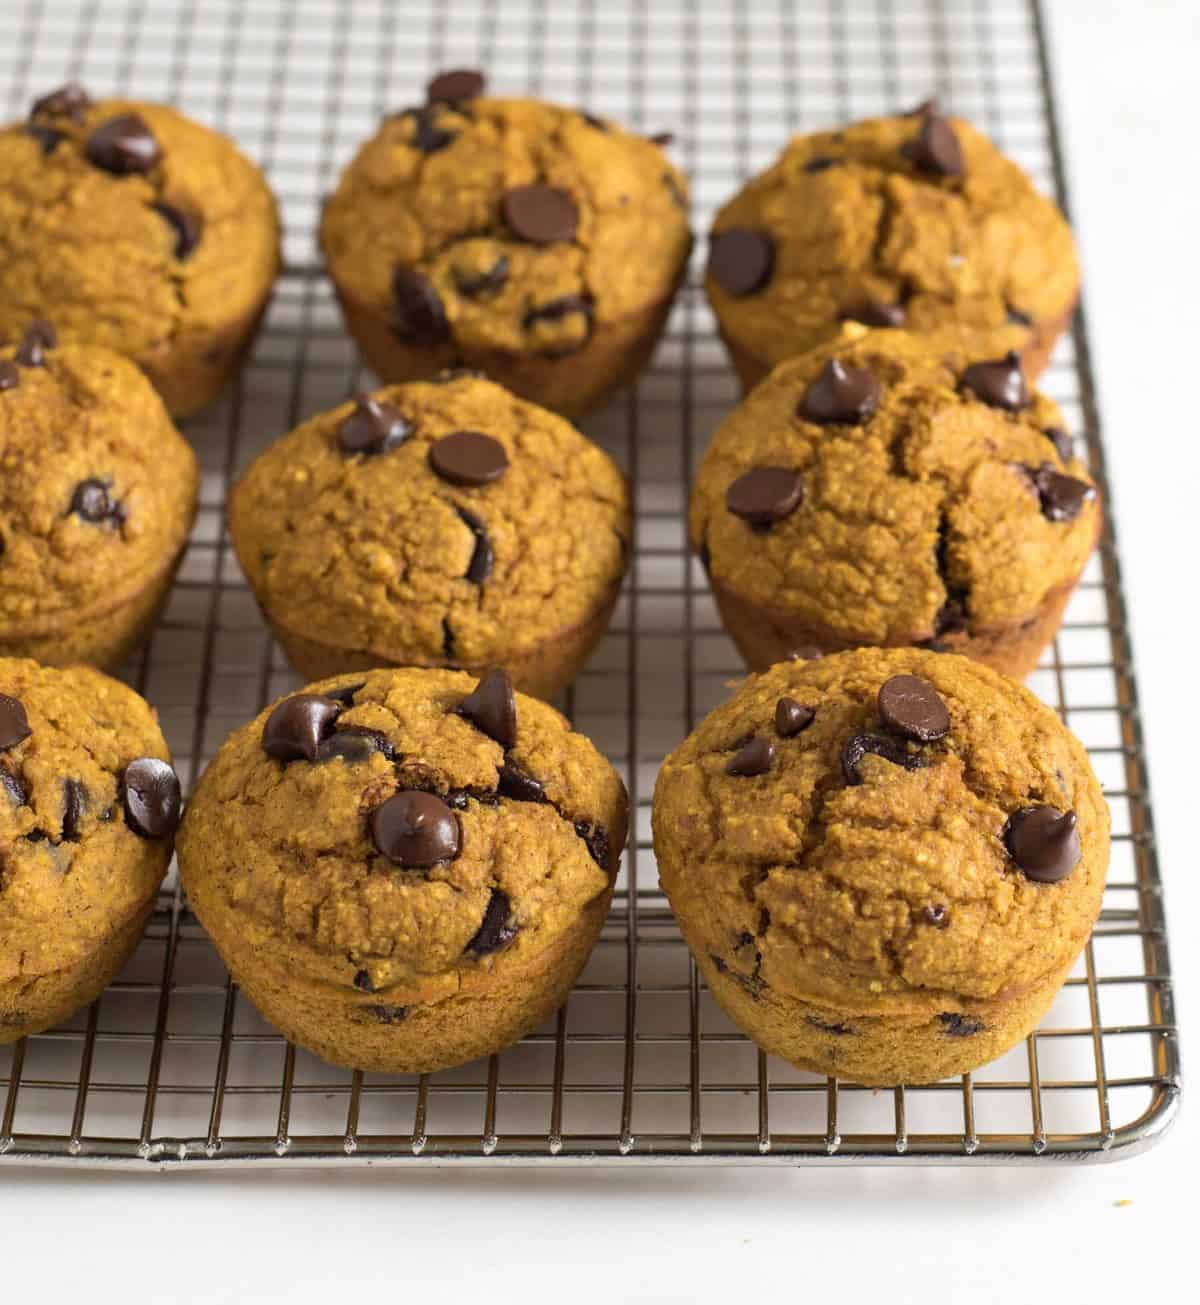 Healthy Pumpkin Blender Muffins are made by placing wholesome ingredients in a blender and processing until smooth. Simply blend, bake, and enjoy!